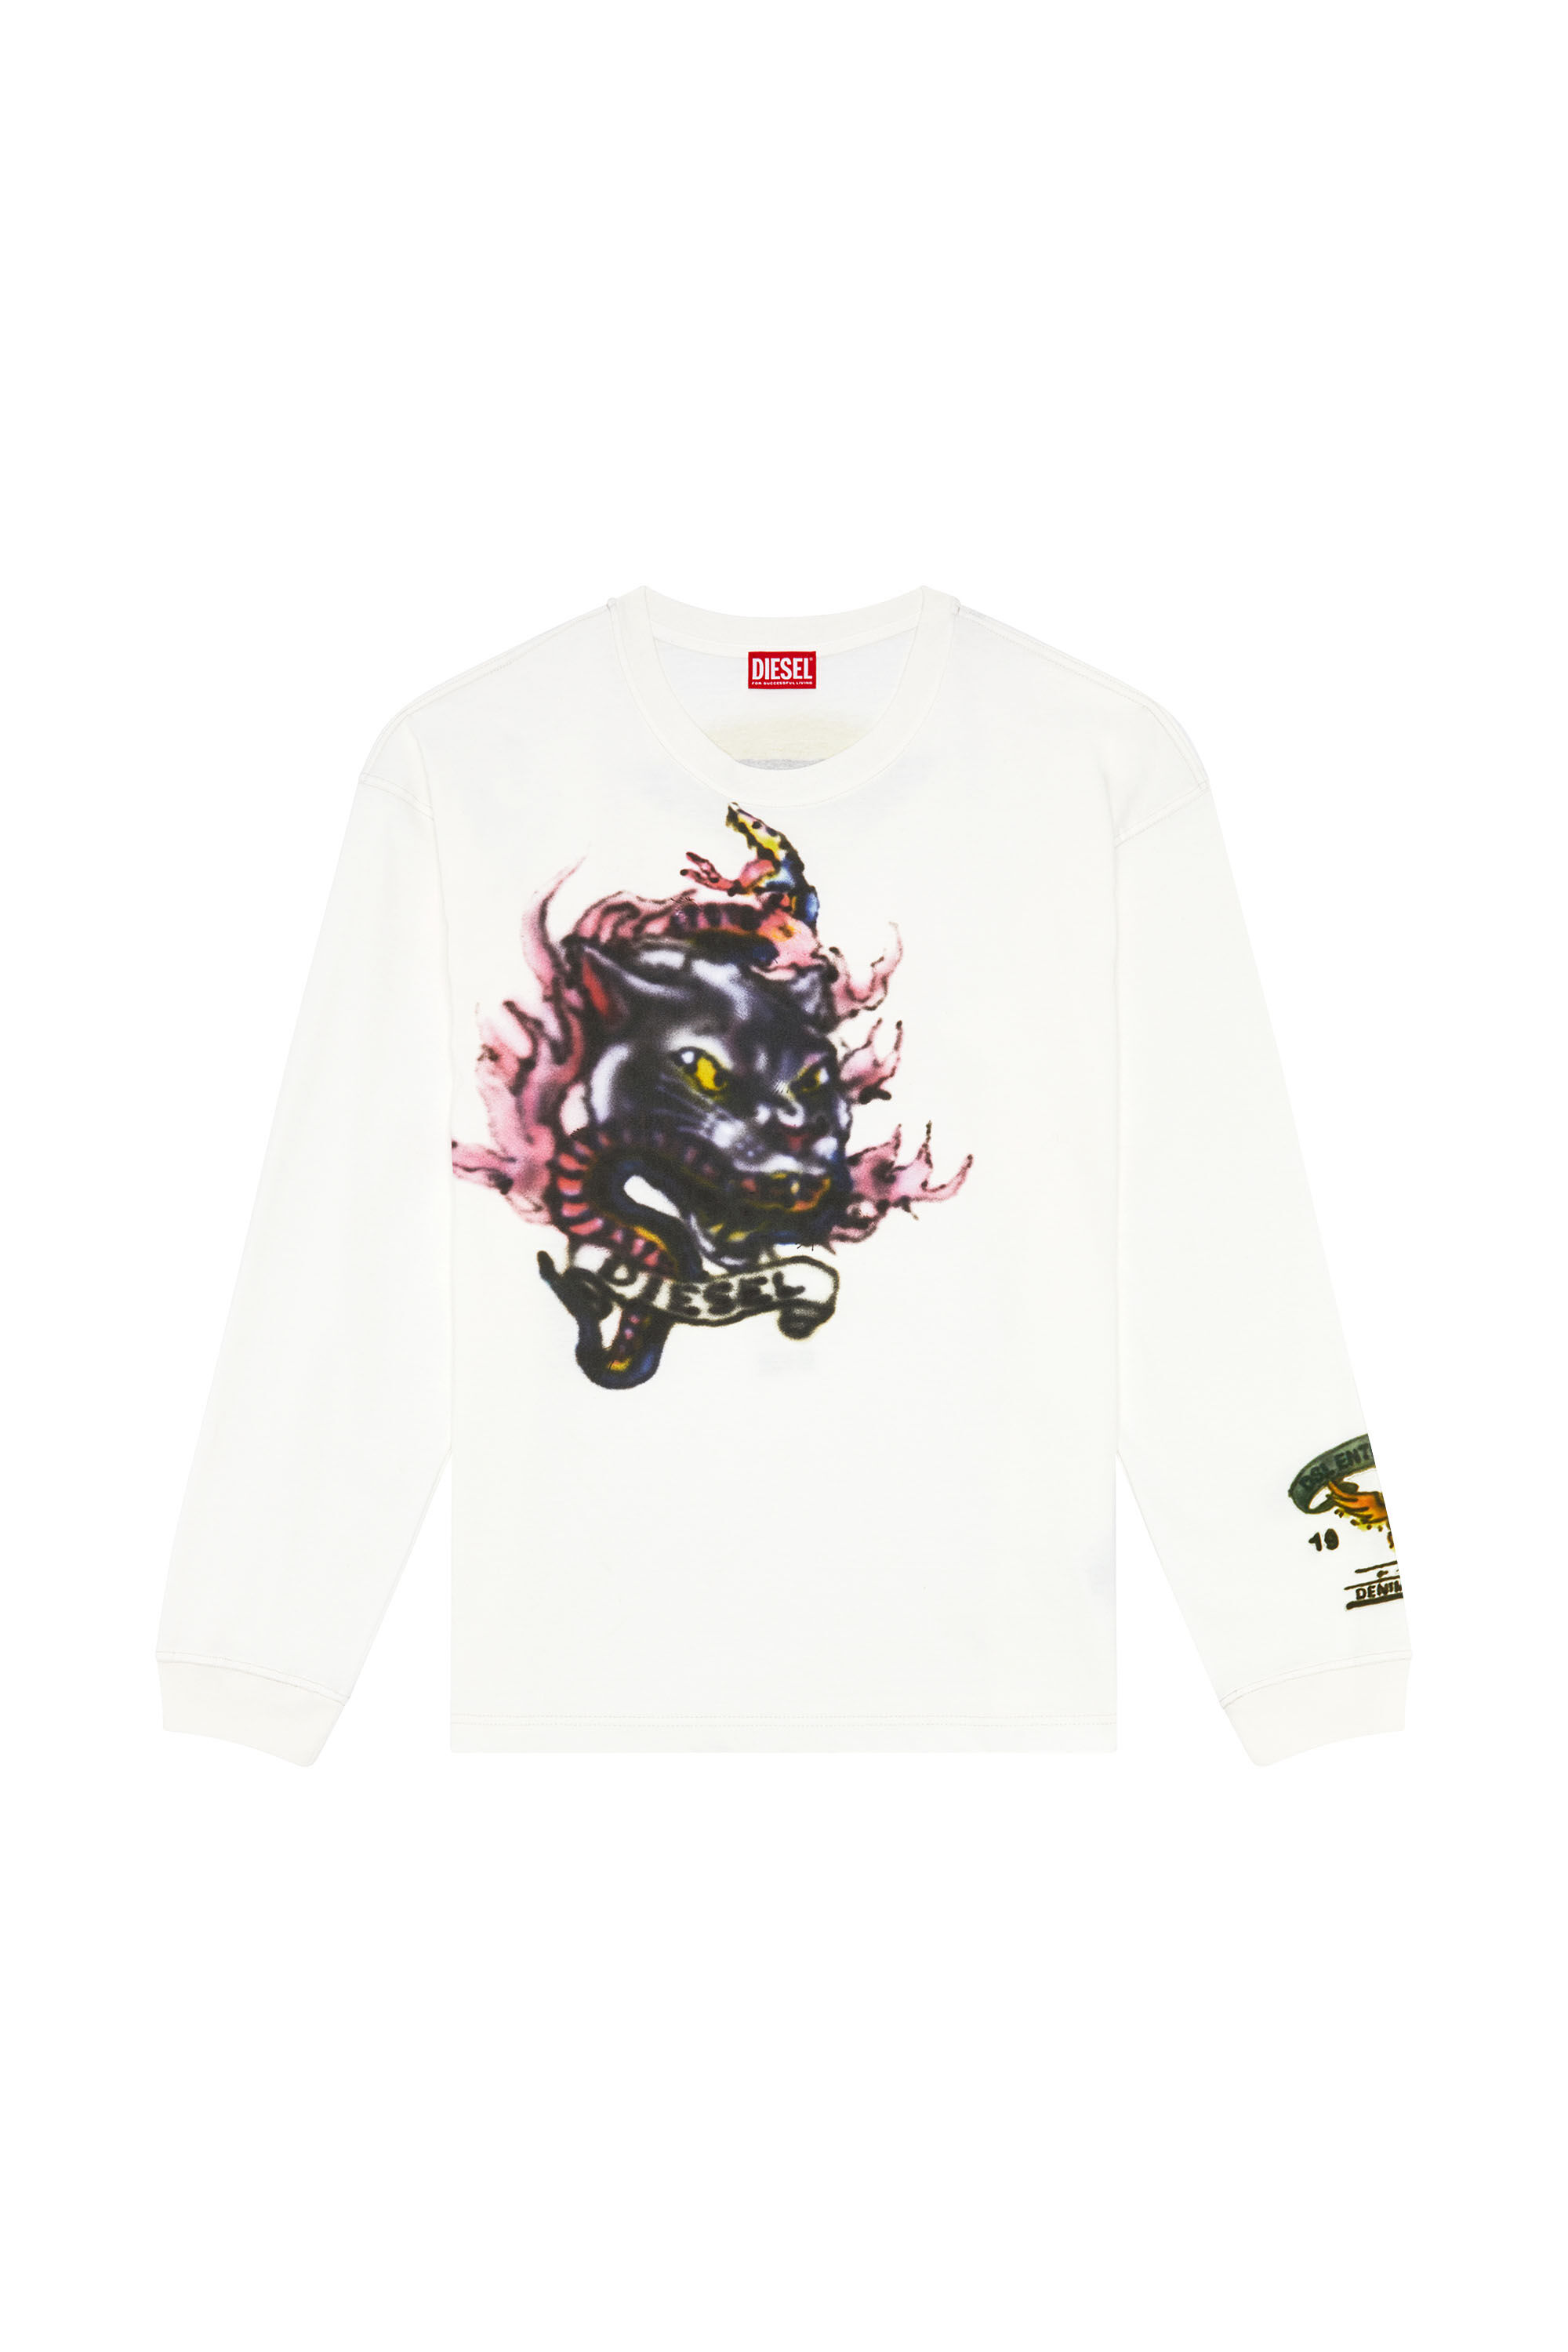 Men's Long-sleeve T-shirt with blurry prints | White | Diesel